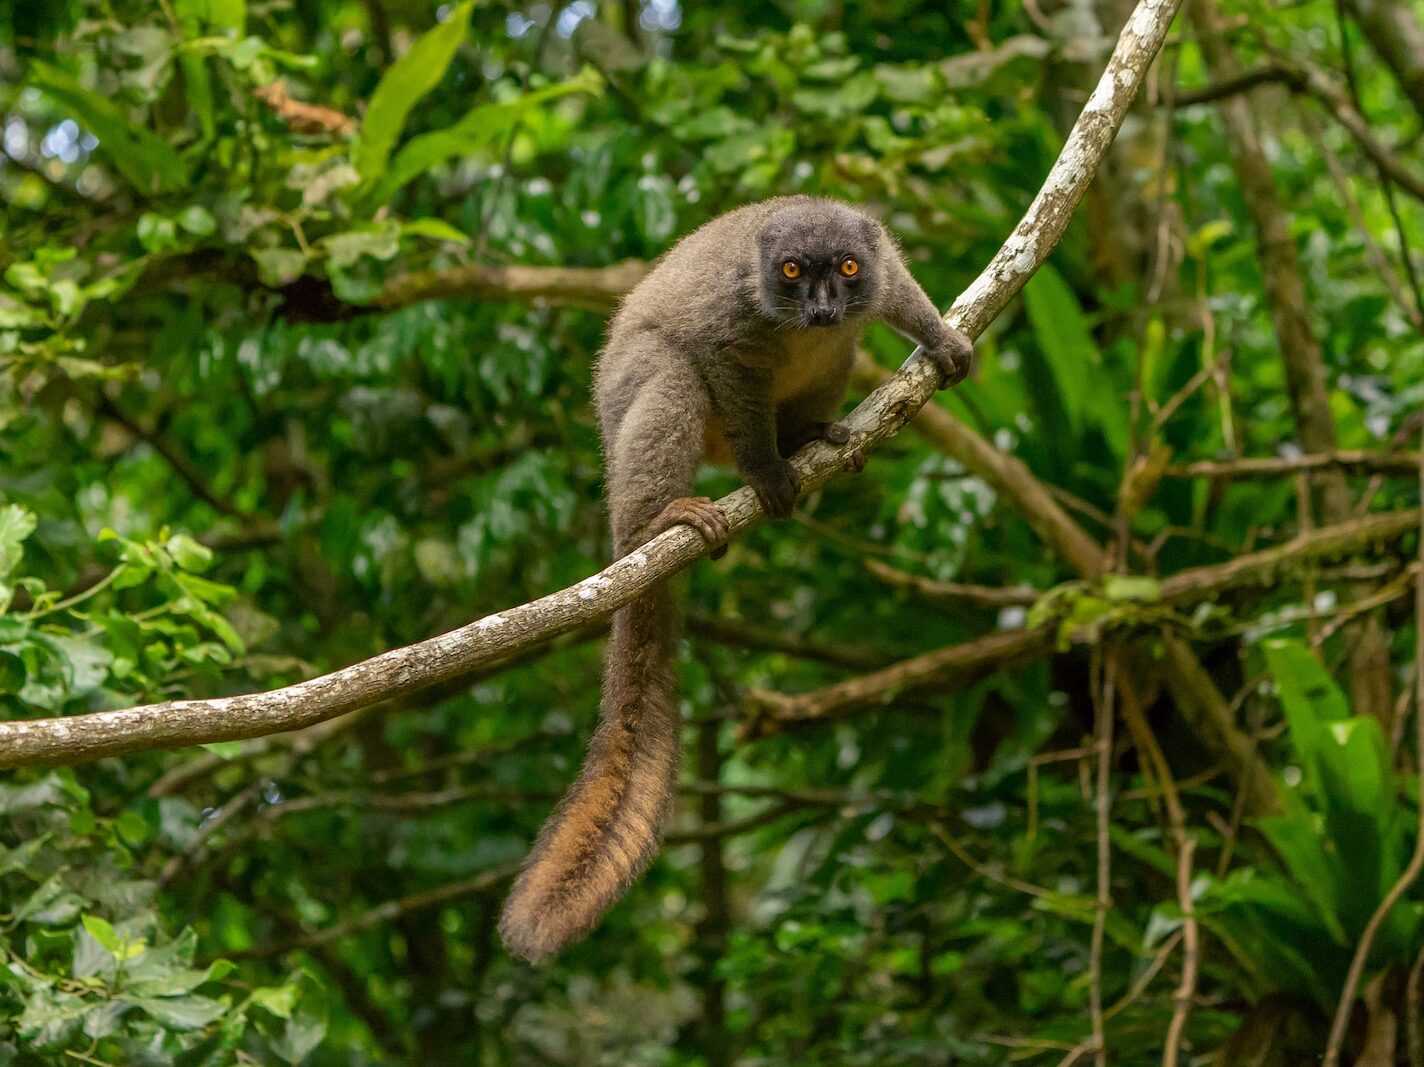 brown and gray monkey on tree branch during daytime